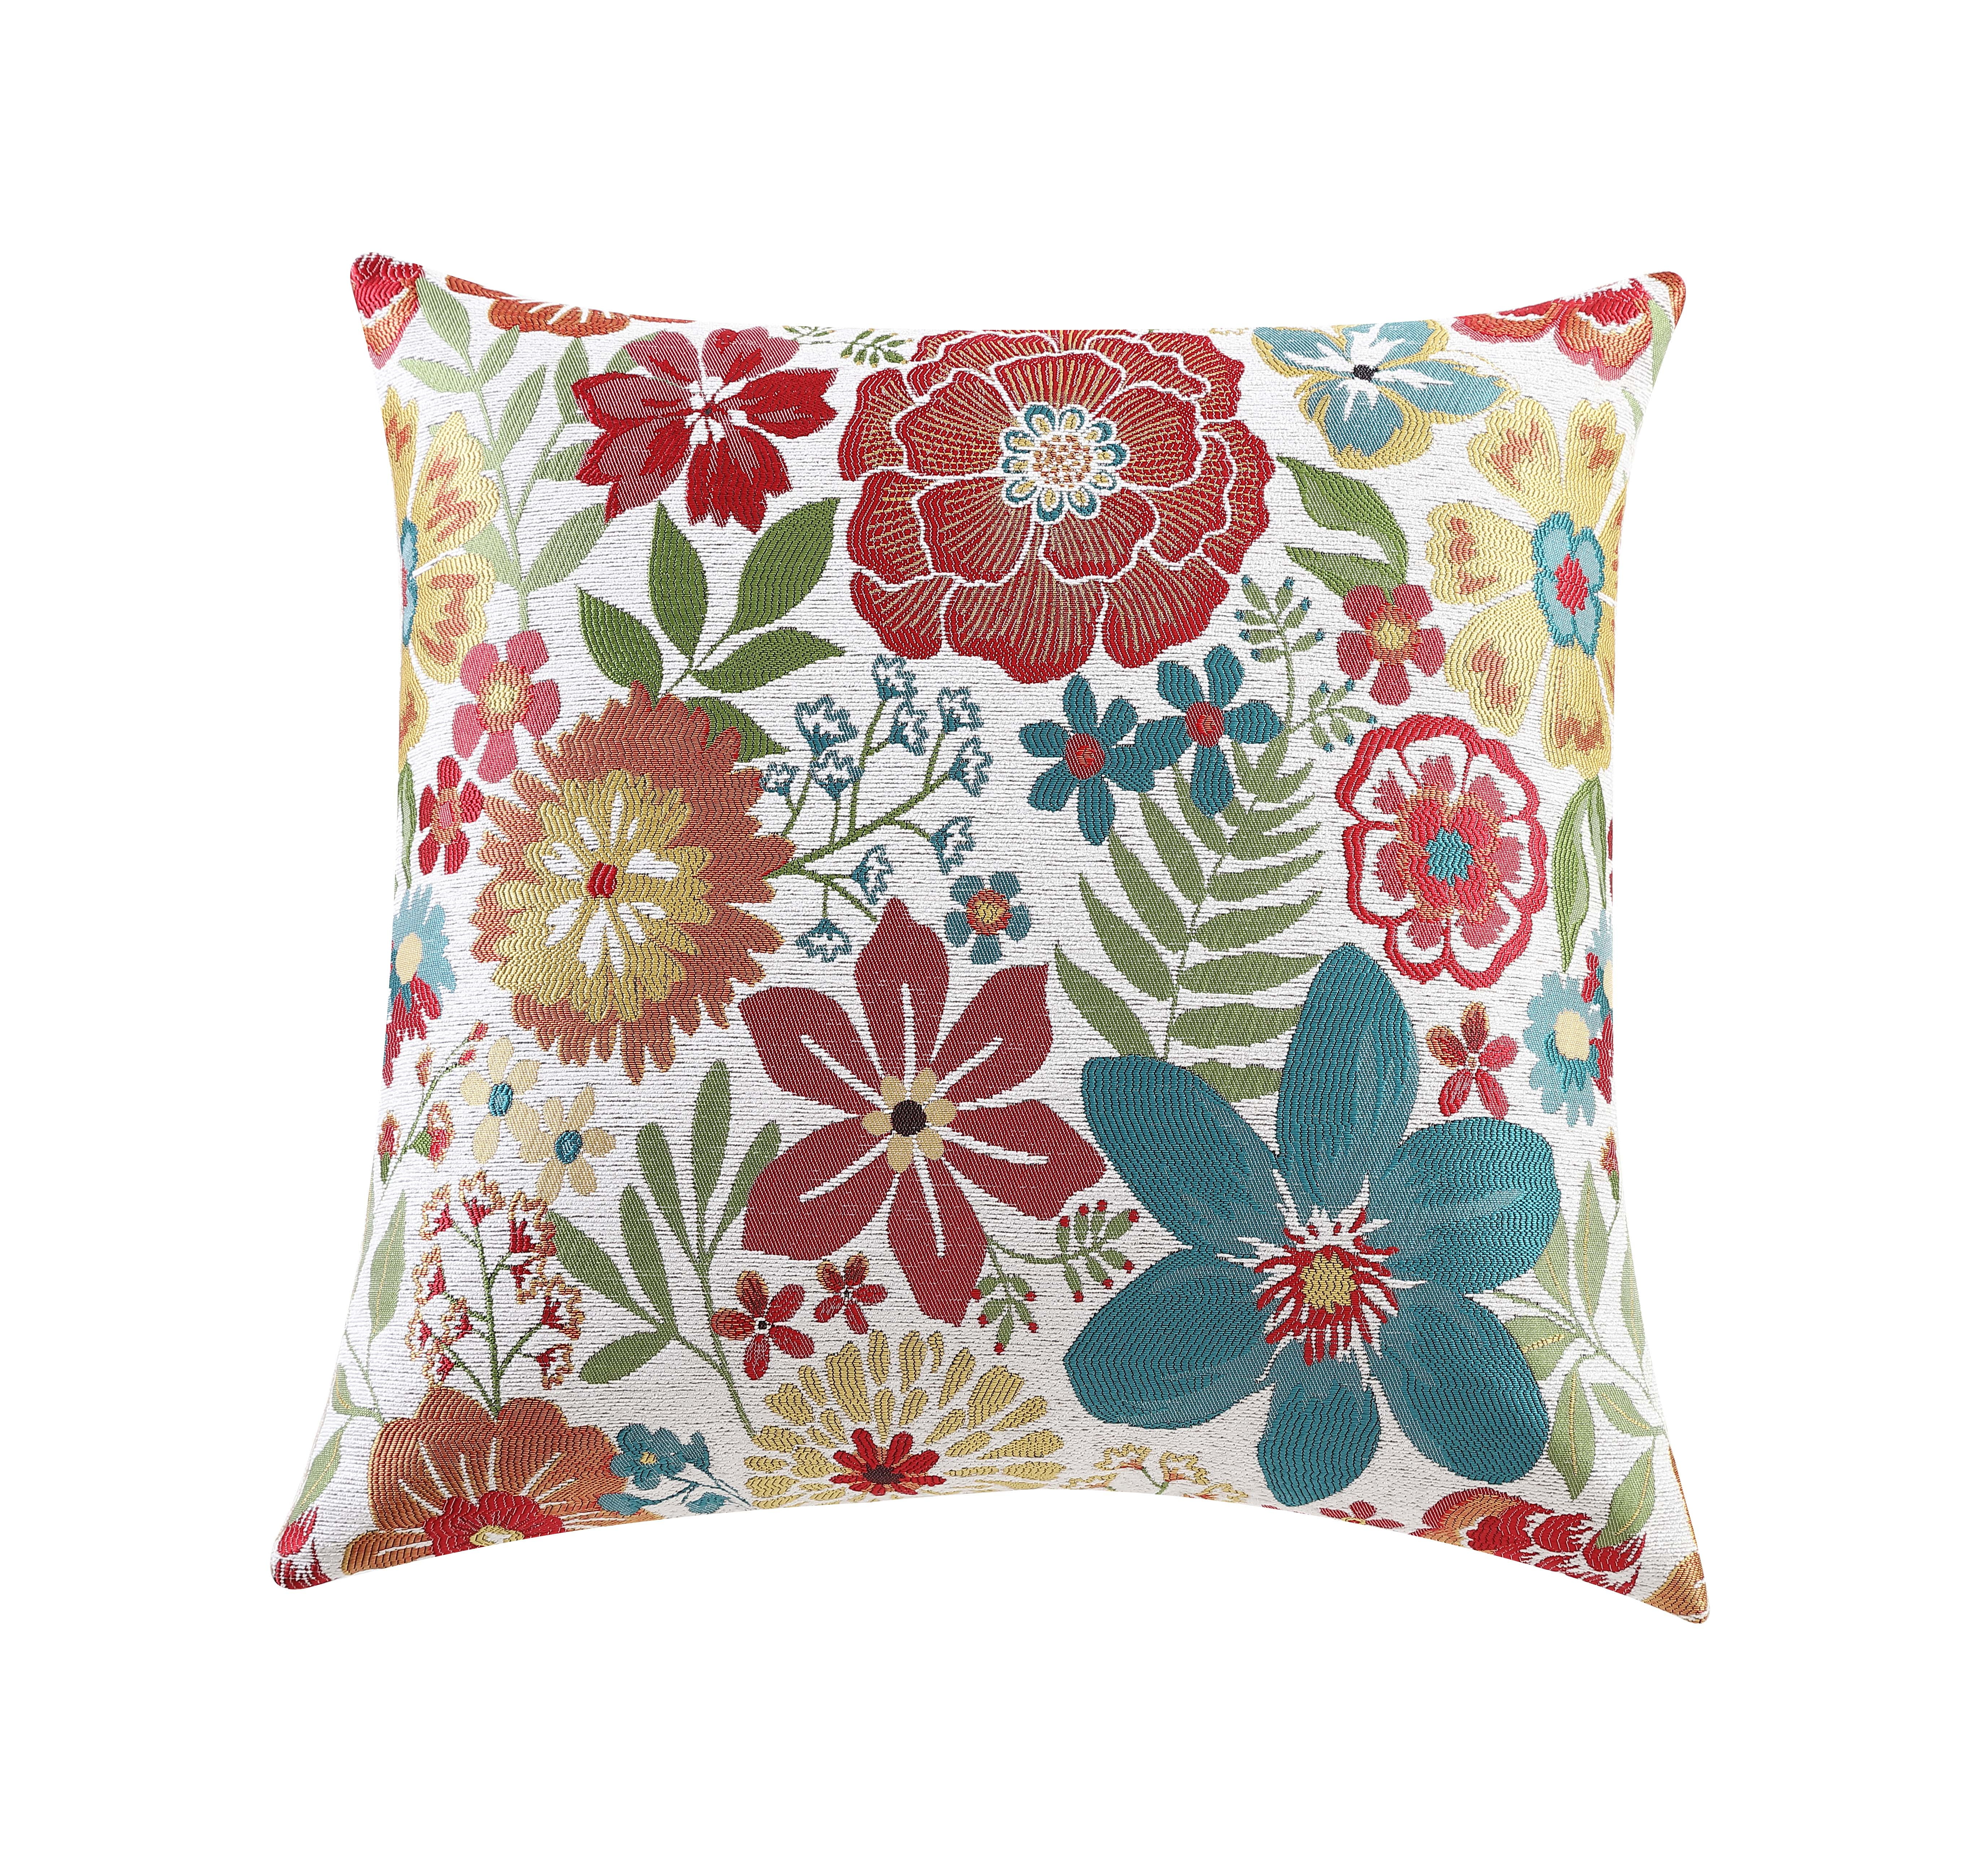 Ravenna Home Casual Floral Throw Pillow 20 x 20 Cream and Blue 